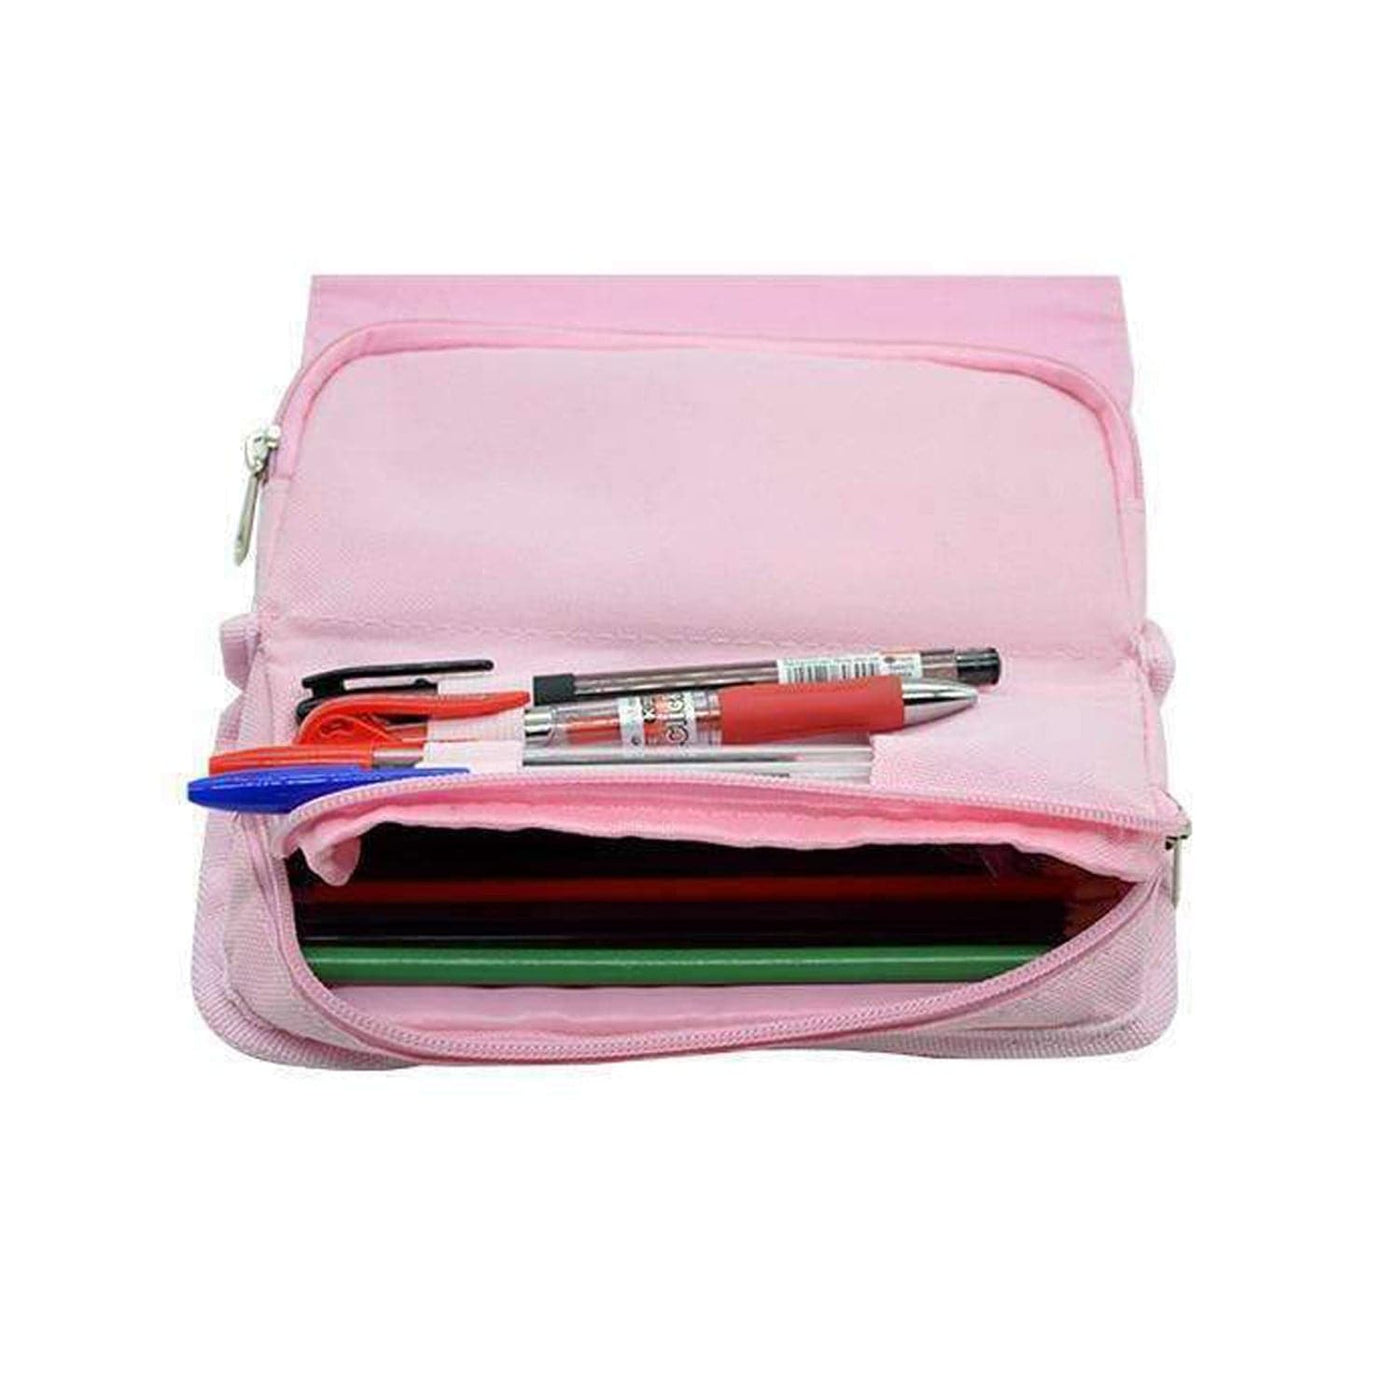 Hot To Go - Chappell Roan Pencil Case